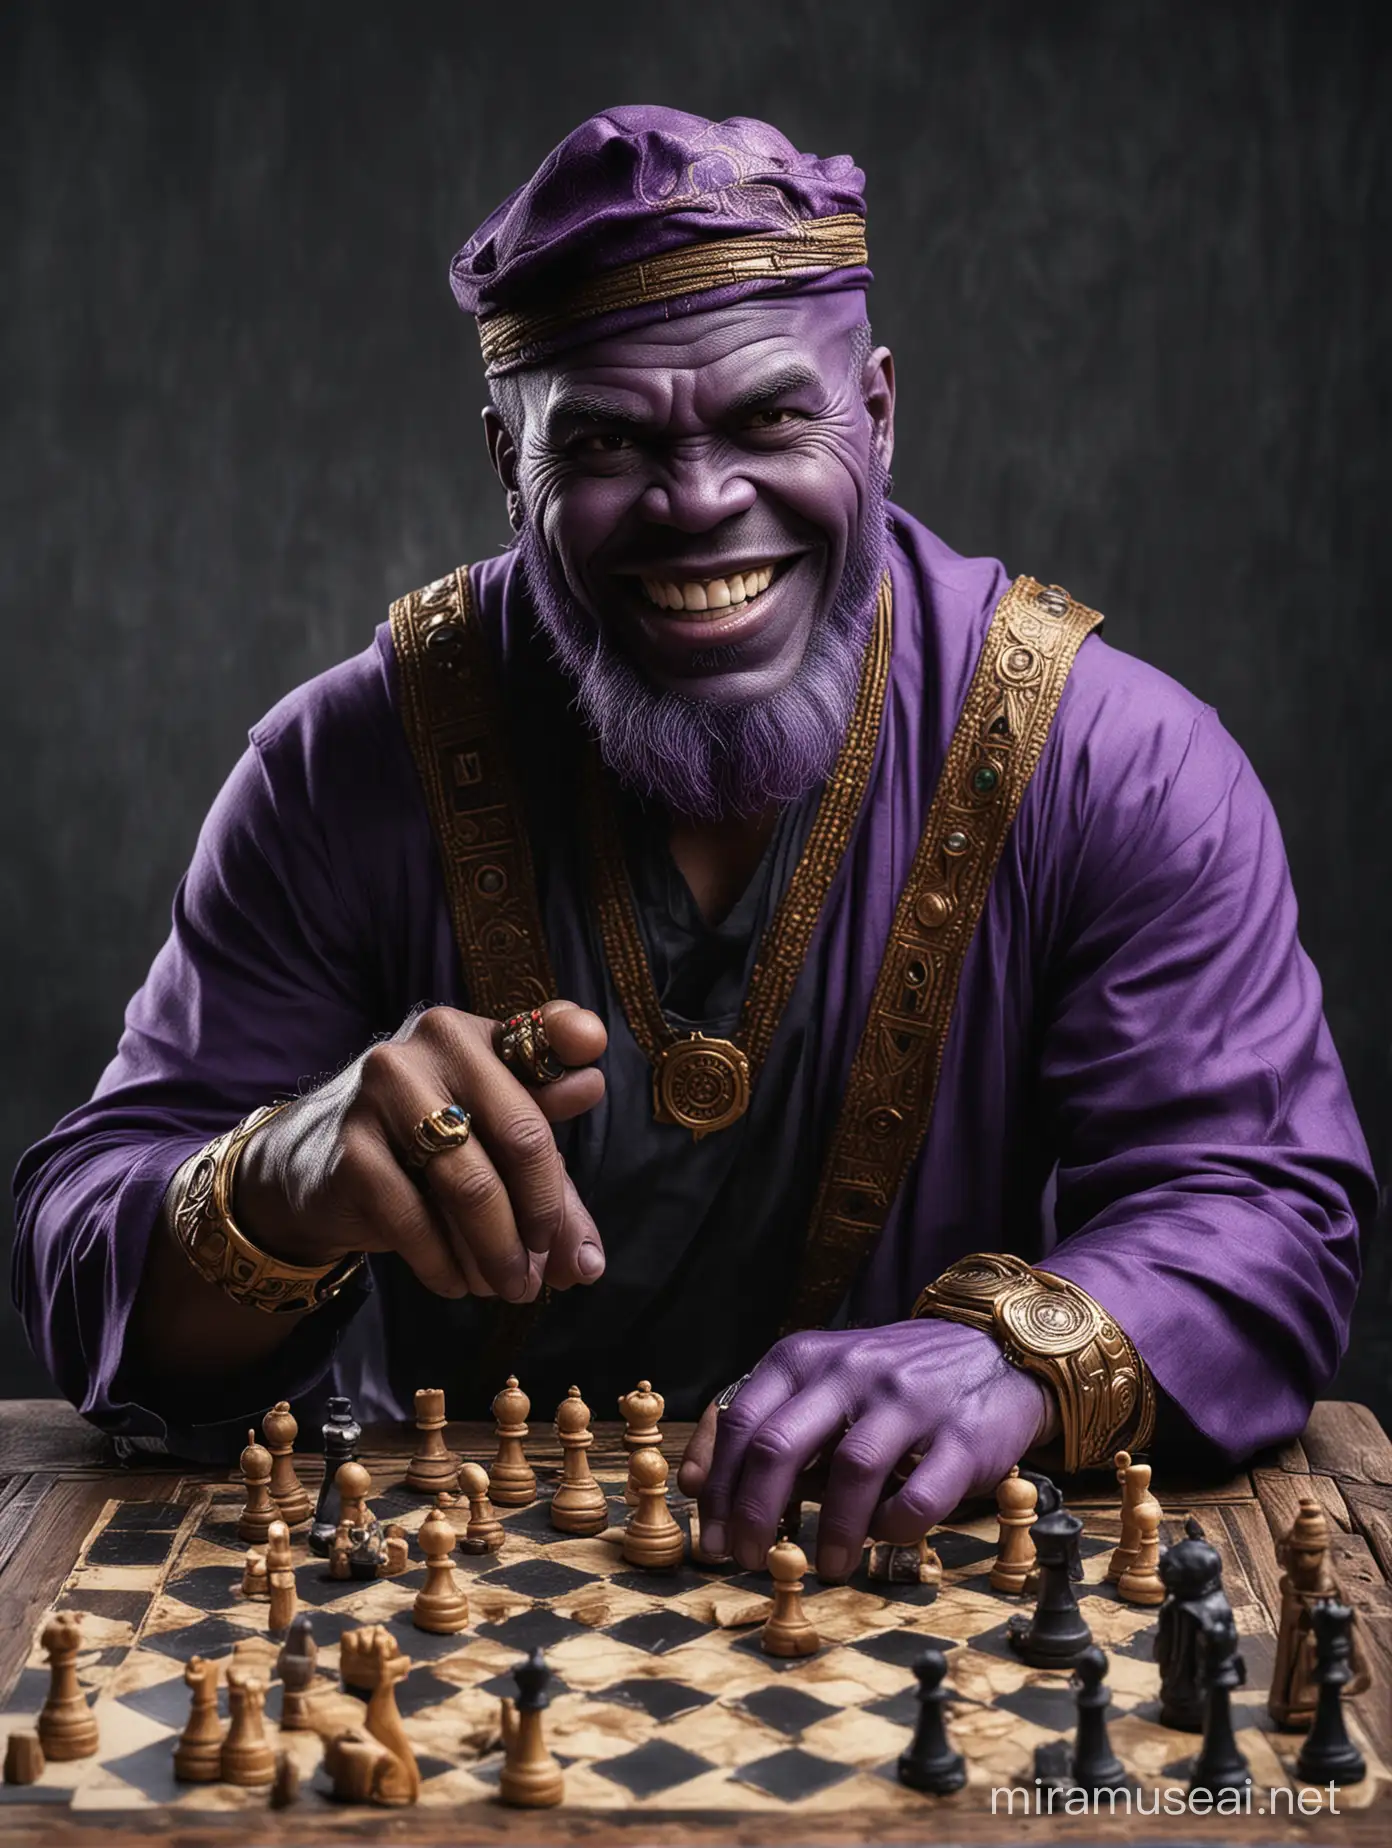 Provide an image of Thanos with his purple skin wearing a traditional Muslim attire (koko), a peci (traditional Indonesian cap), and five large gemstone rings in purple, blue, red, orange, green, and yellow on each of his five fingers. He is laughing cute while playing chess with superhero Ant-Man against the backdrop of a Jakarta market. and ensure a dramatic effect against a high-contrast black background for printing in DTF (Direct-to-Film) Printing or water-based color printing. The image and background should be centered and uncropped